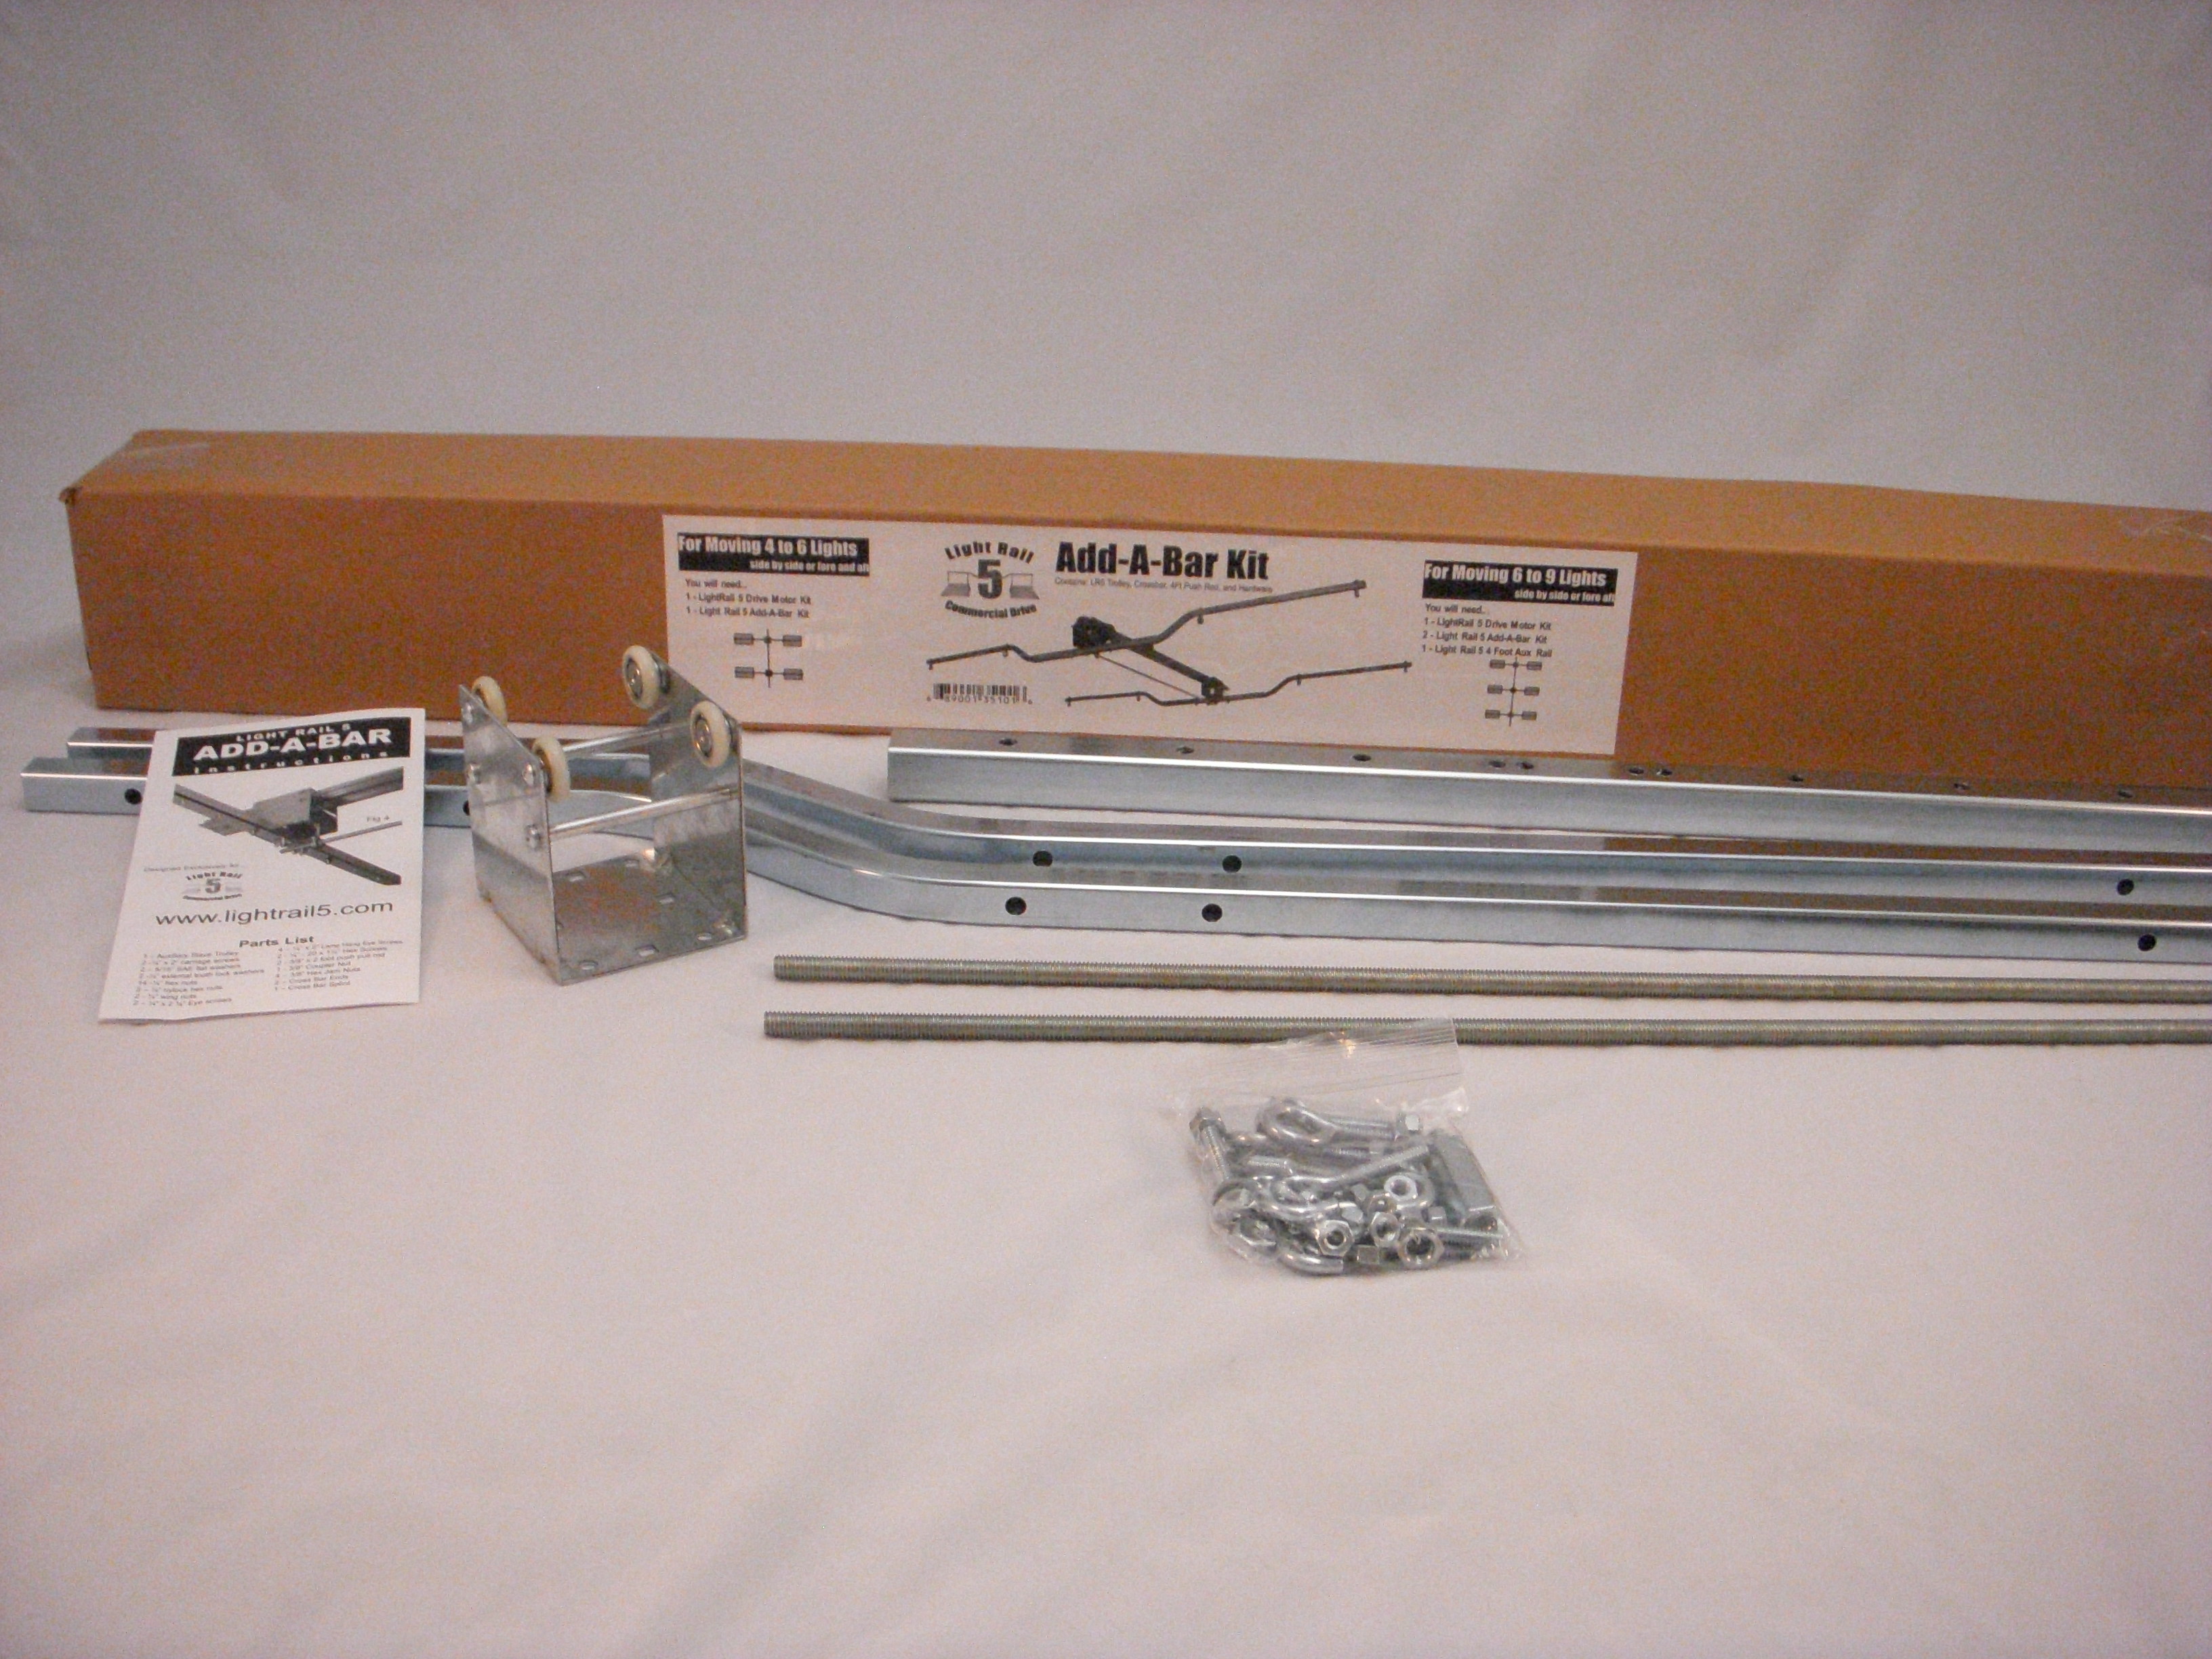 Picture for LightRail 5.0 Add-A-Bar Kit